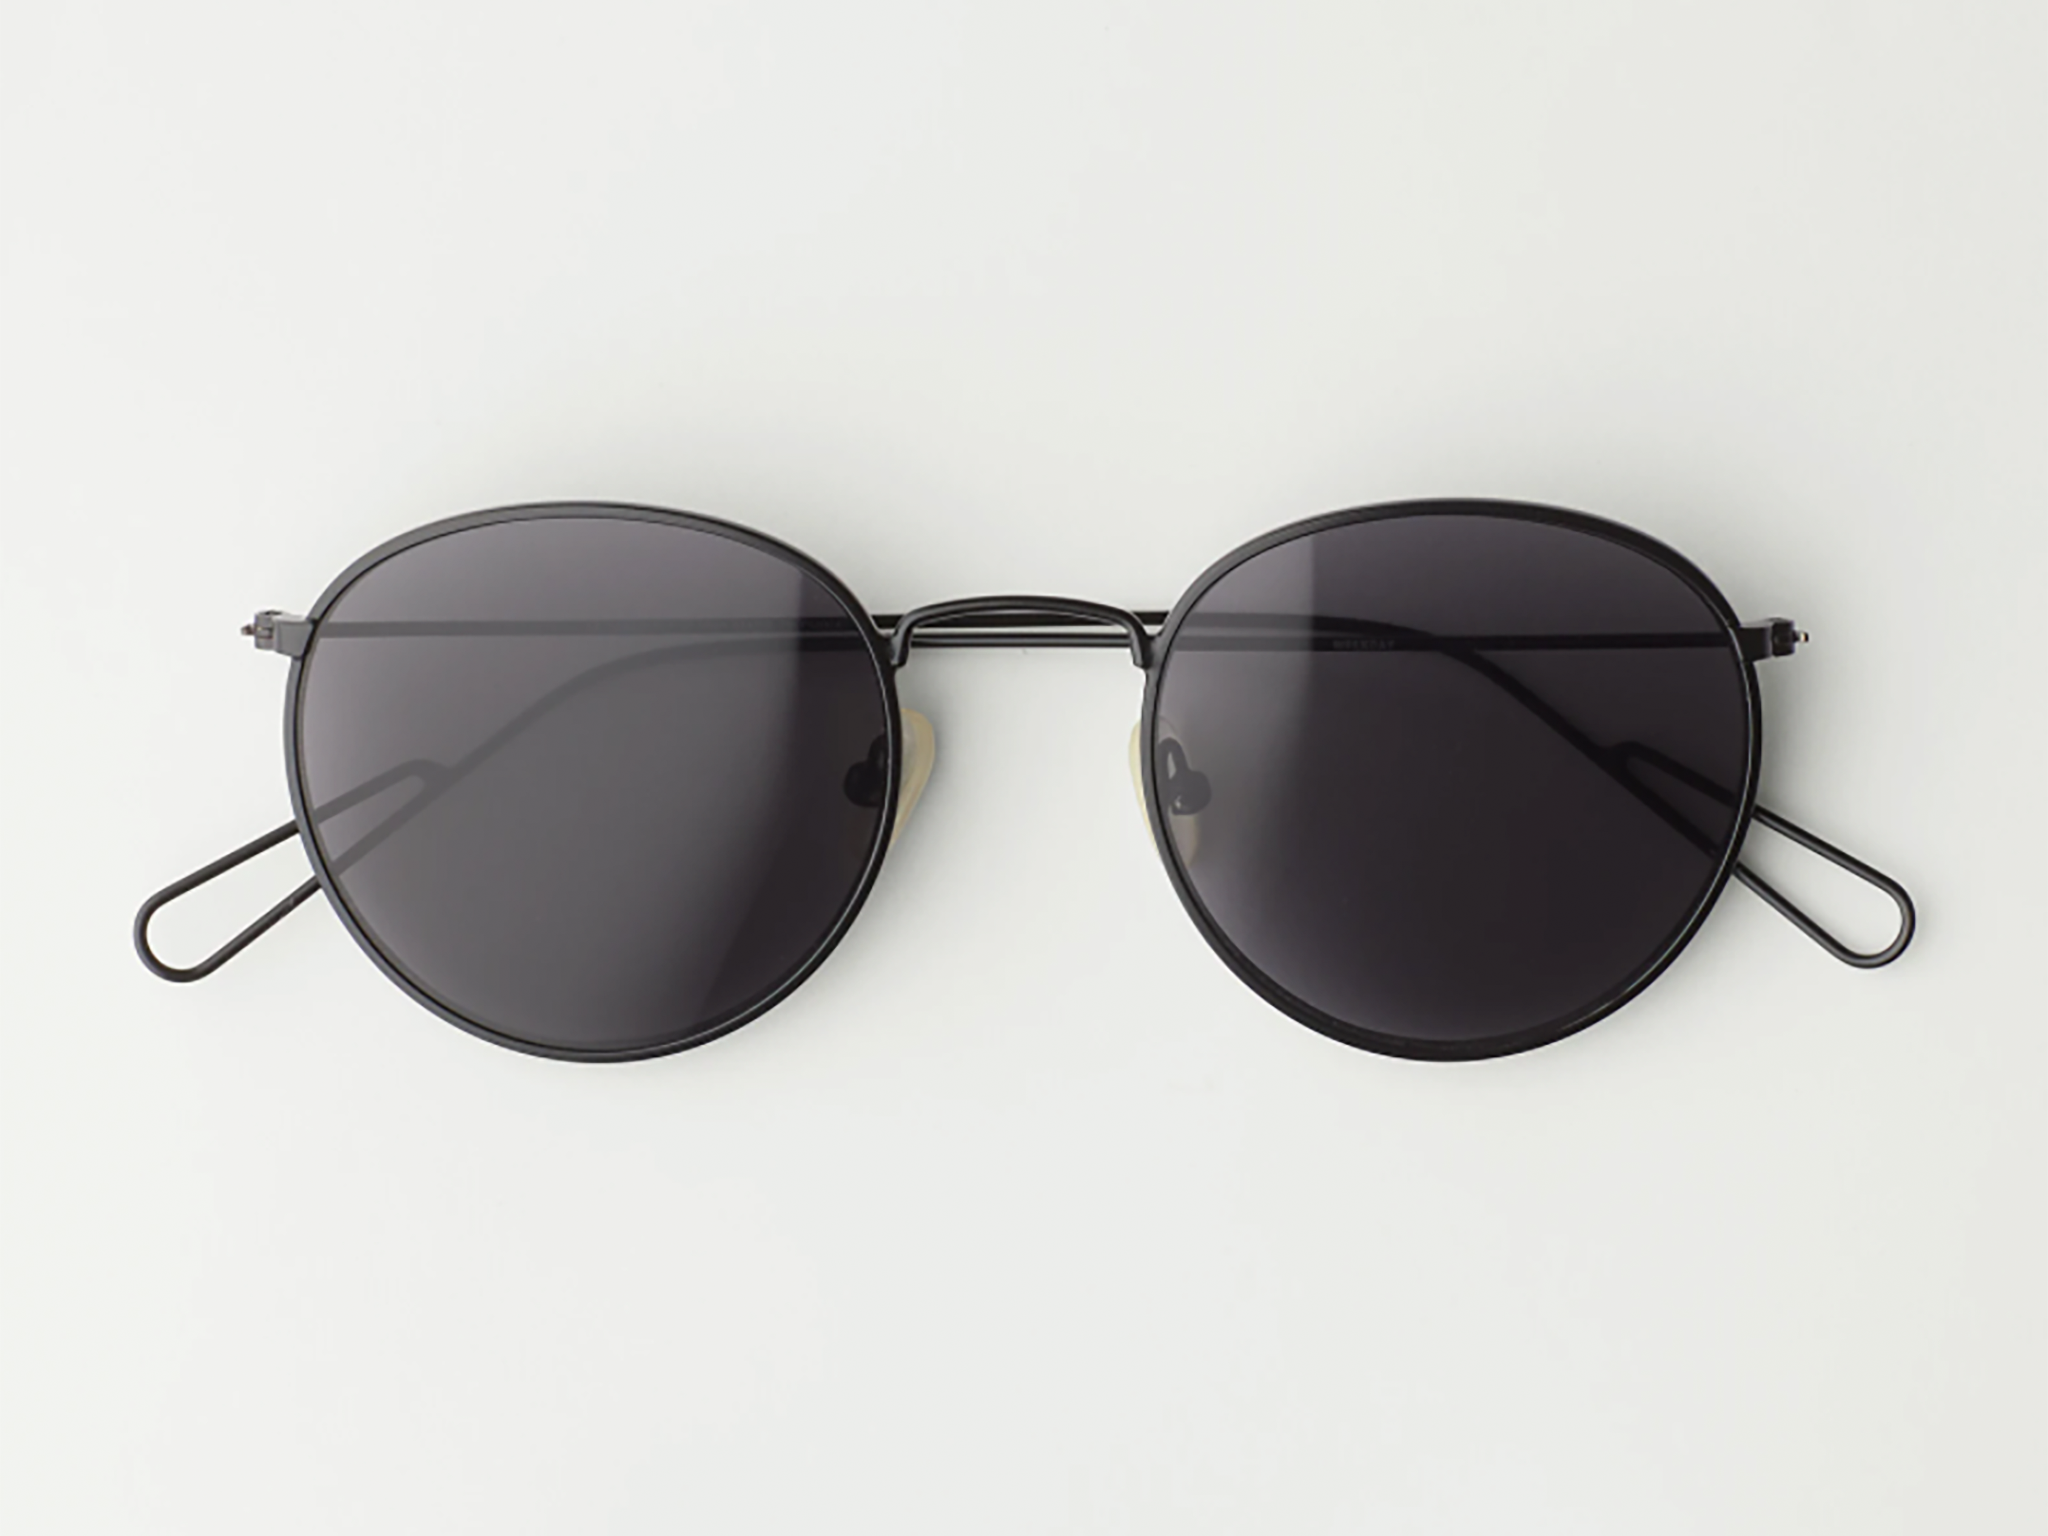 Weekday explore rounded sunglasses.png